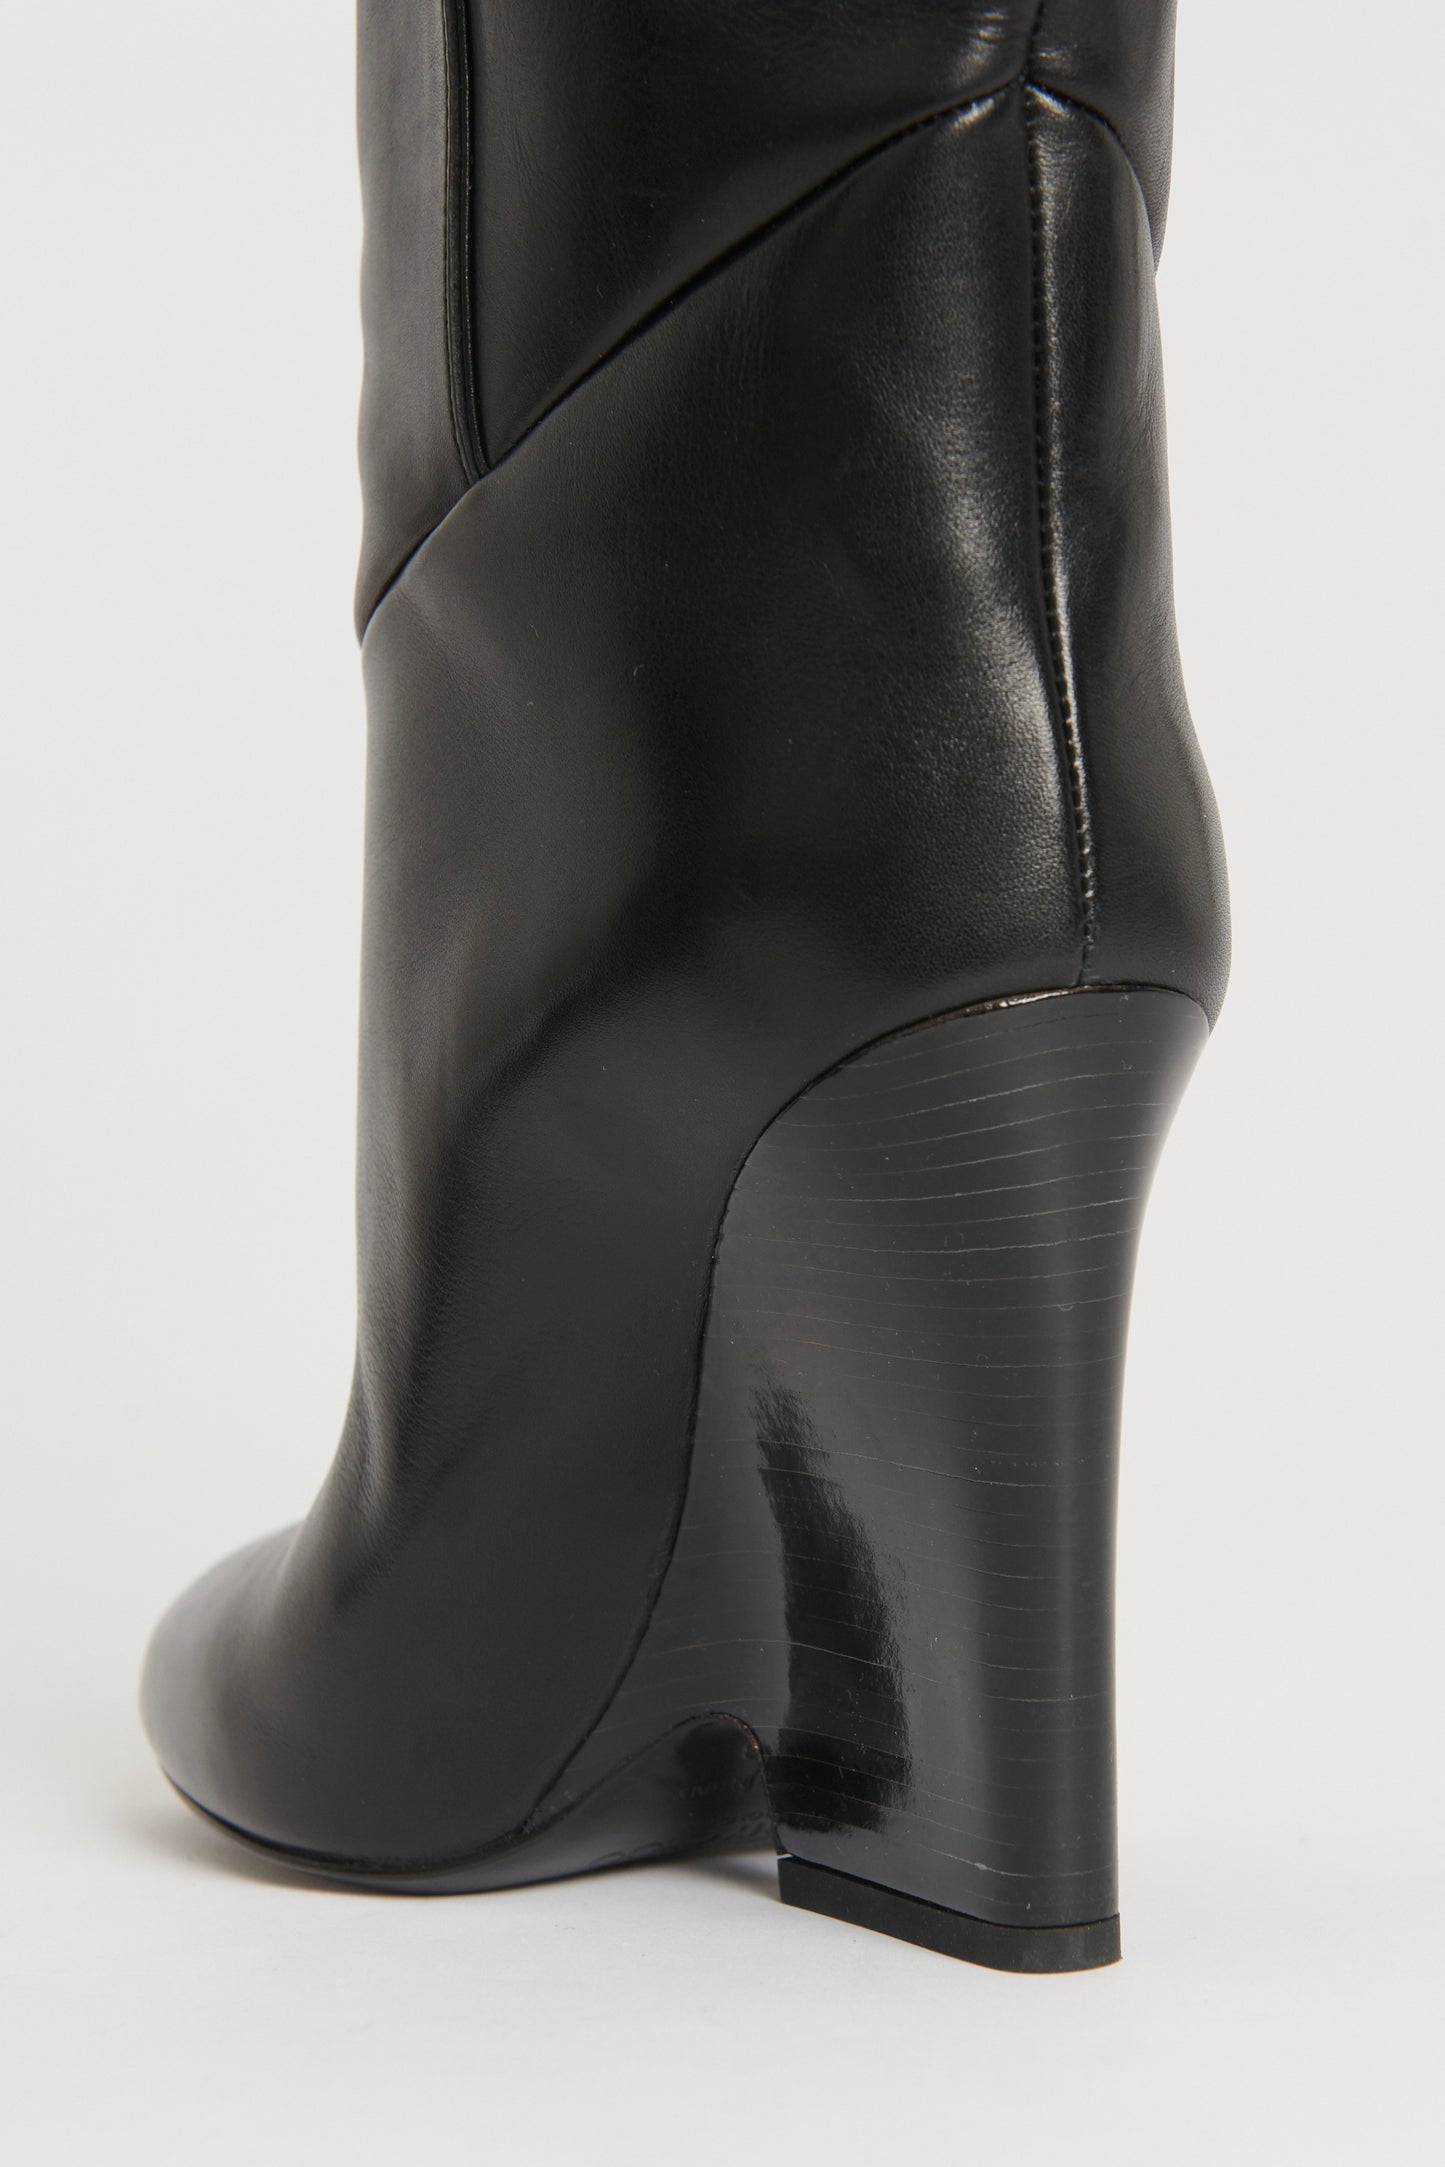 Black Leather Preowned Cartel Knee High Boots